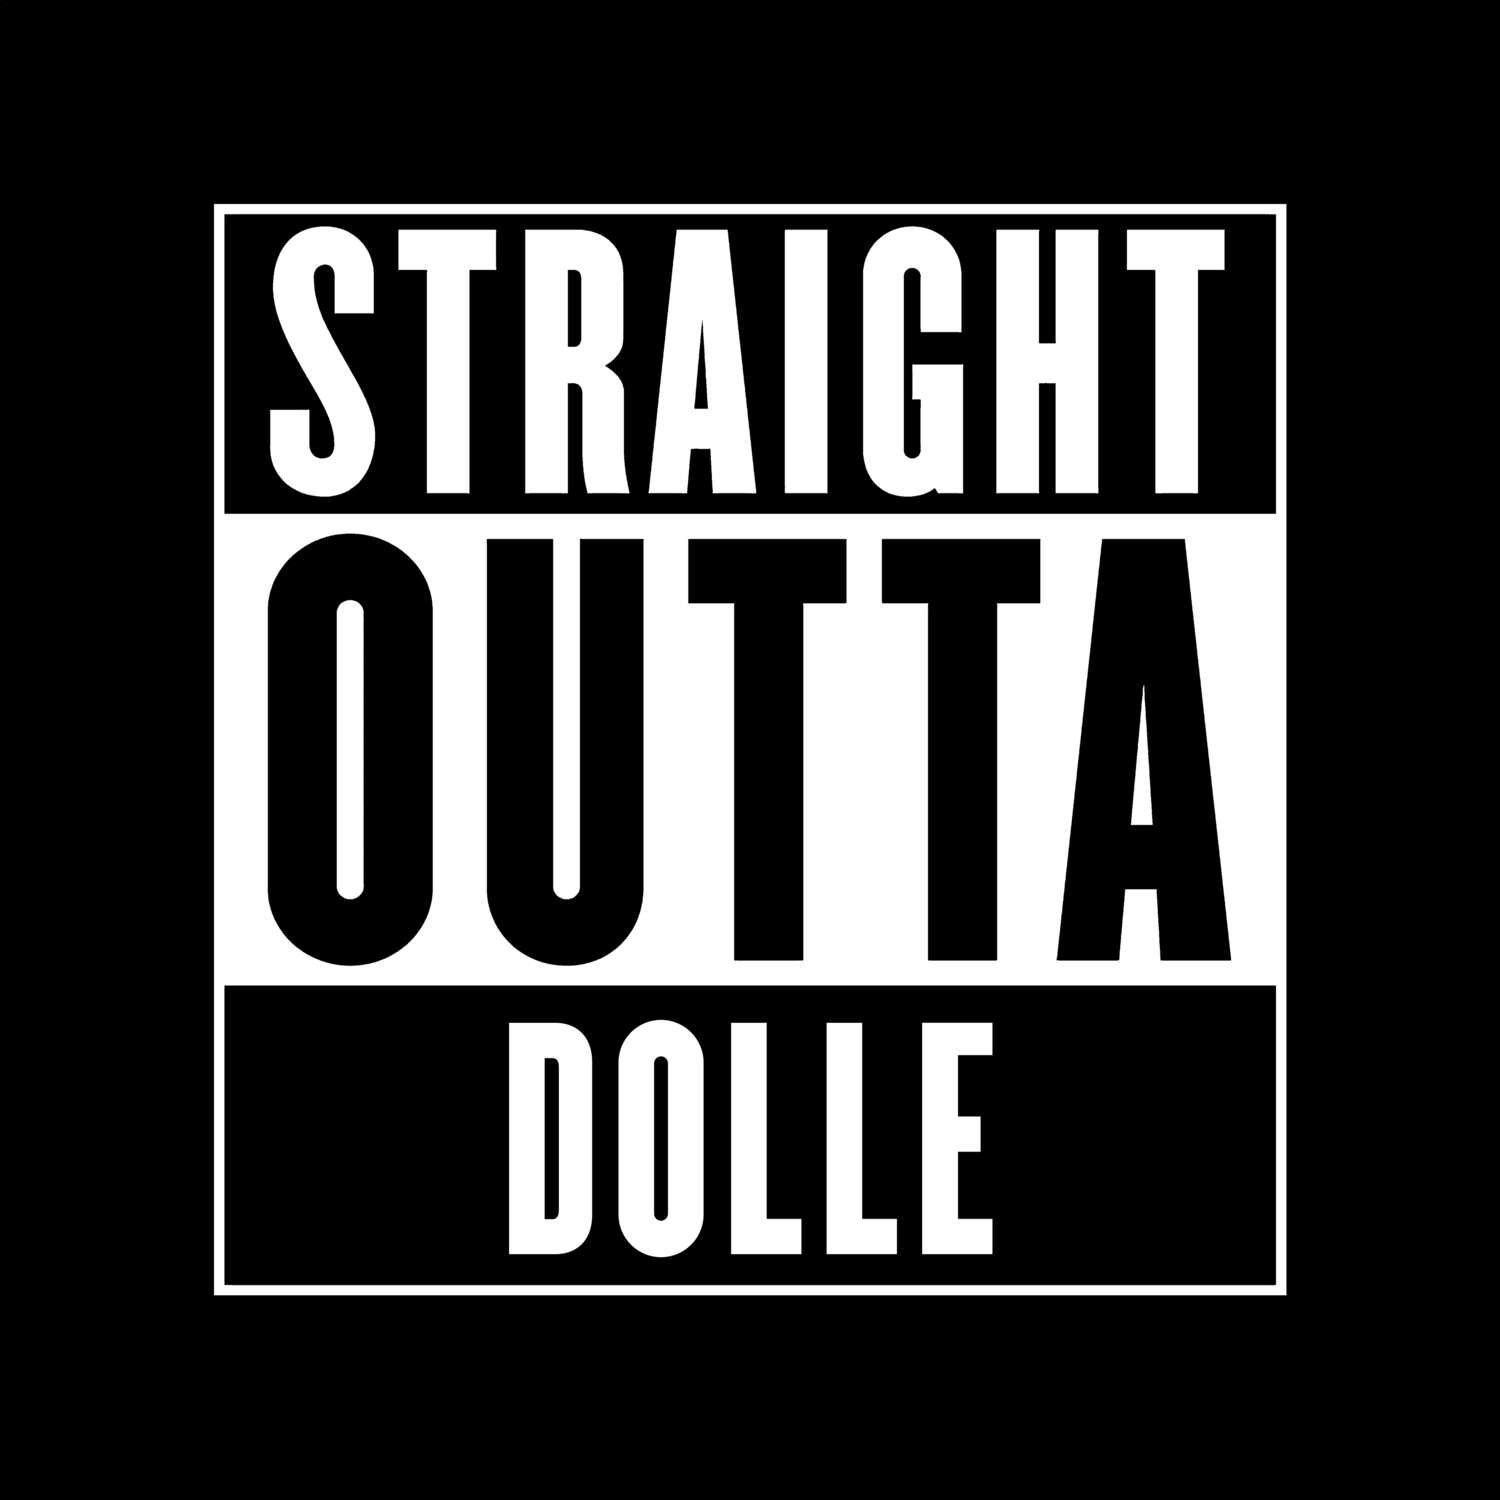 Dolle T-Shirt »Straight Outta«